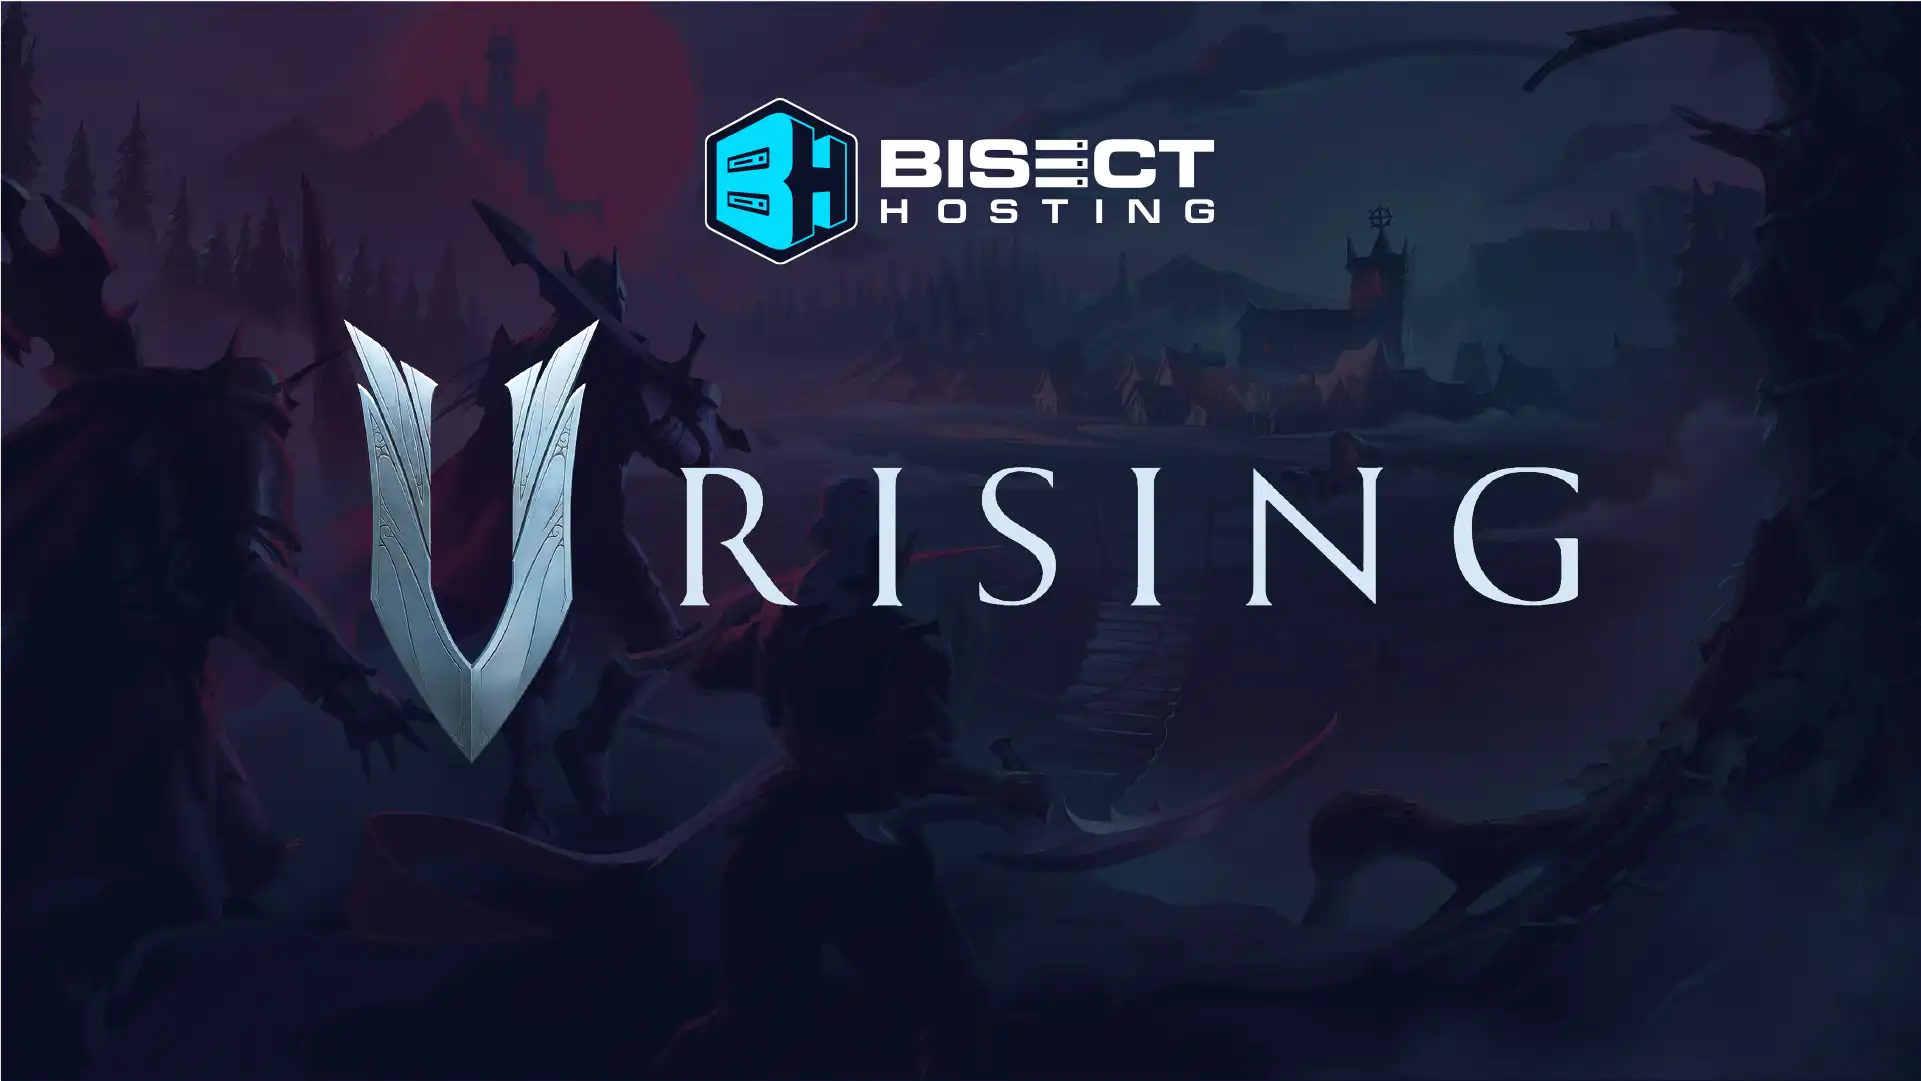 What is V Rising?